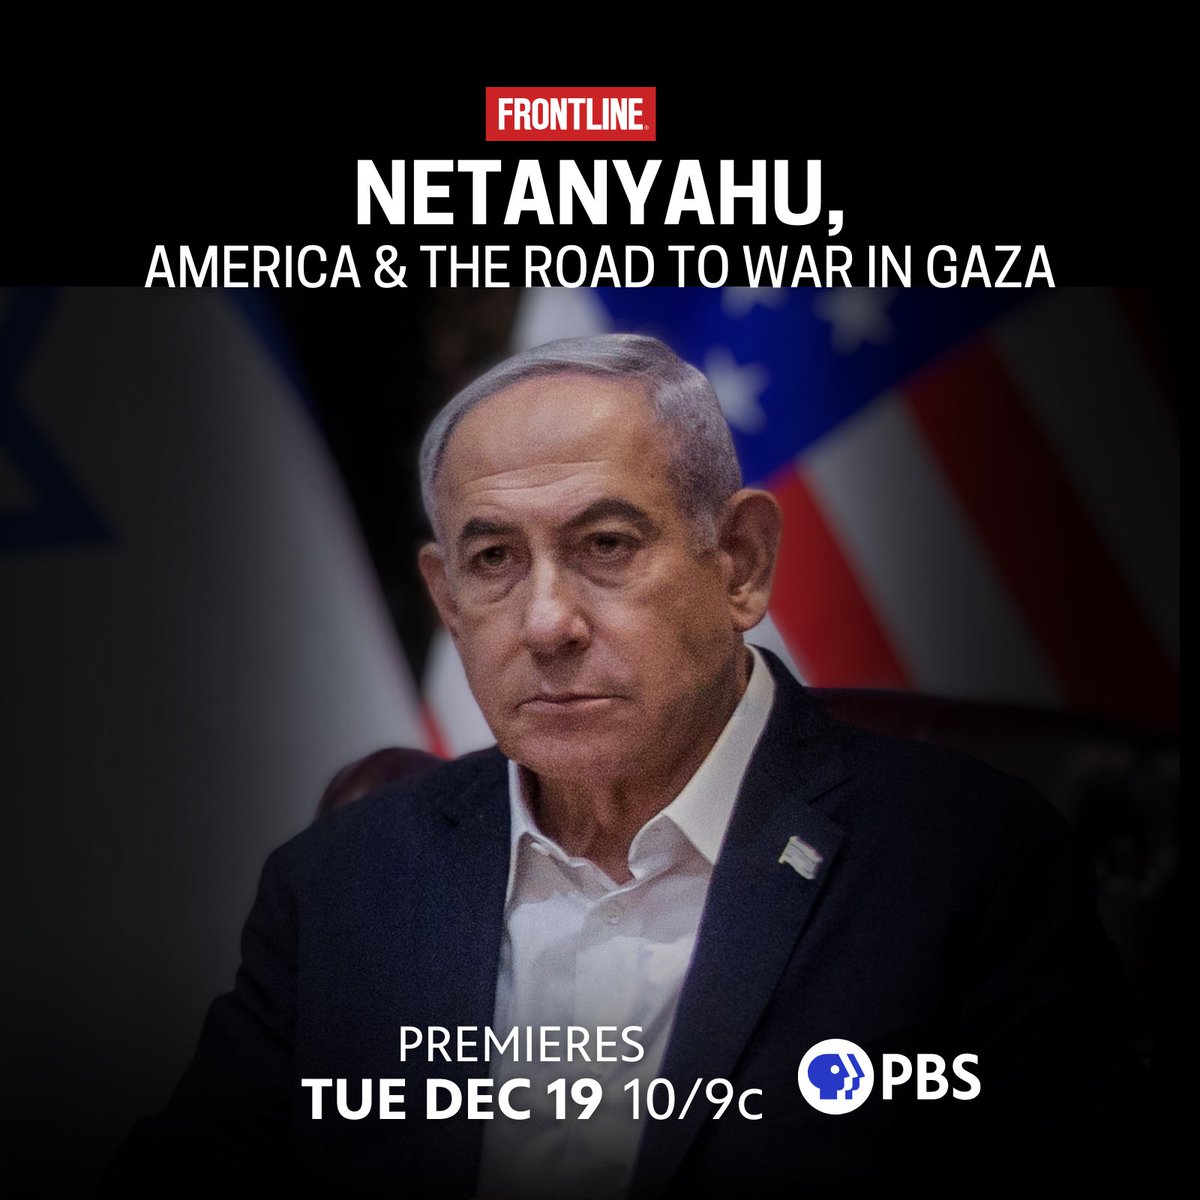 'Netanyahu, America & the Road to War in Gaza' draws on years of reporting and is an incisive look at the long history of failed peace efforts and violent conflict in the region. Premieres Tue, Dec 19 on PBS. to.pbs.org/3TwoK5w